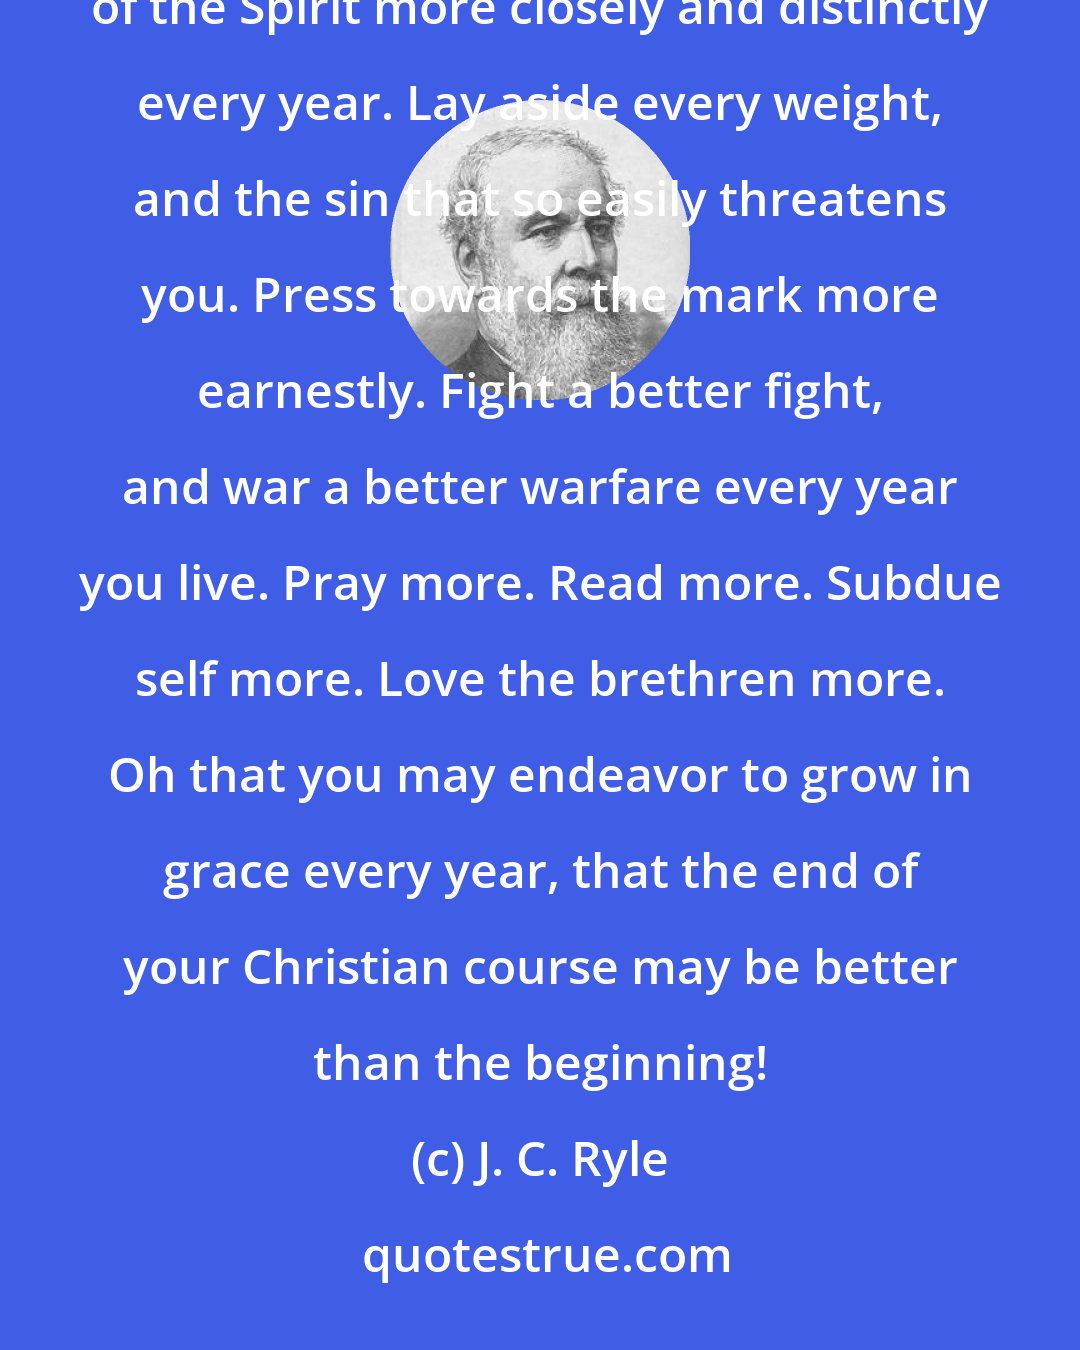 J. C. Ryle: Walk more closely with God. Get nearer to Christ. Seek to exchange hope for assurance. Seek to feel the witness of the Spirit more closely and distinctly every year. Lay aside every weight, and the sin that so easily threatens you. Press towards the mark more earnestly. Fight a better fight, and war a better warfare every year you live. Pray more. Read more. Subdue self more. Love the brethren more. Oh that you may endeavor to grow in grace every year, that the end of your Christian course may be better than the beginning!